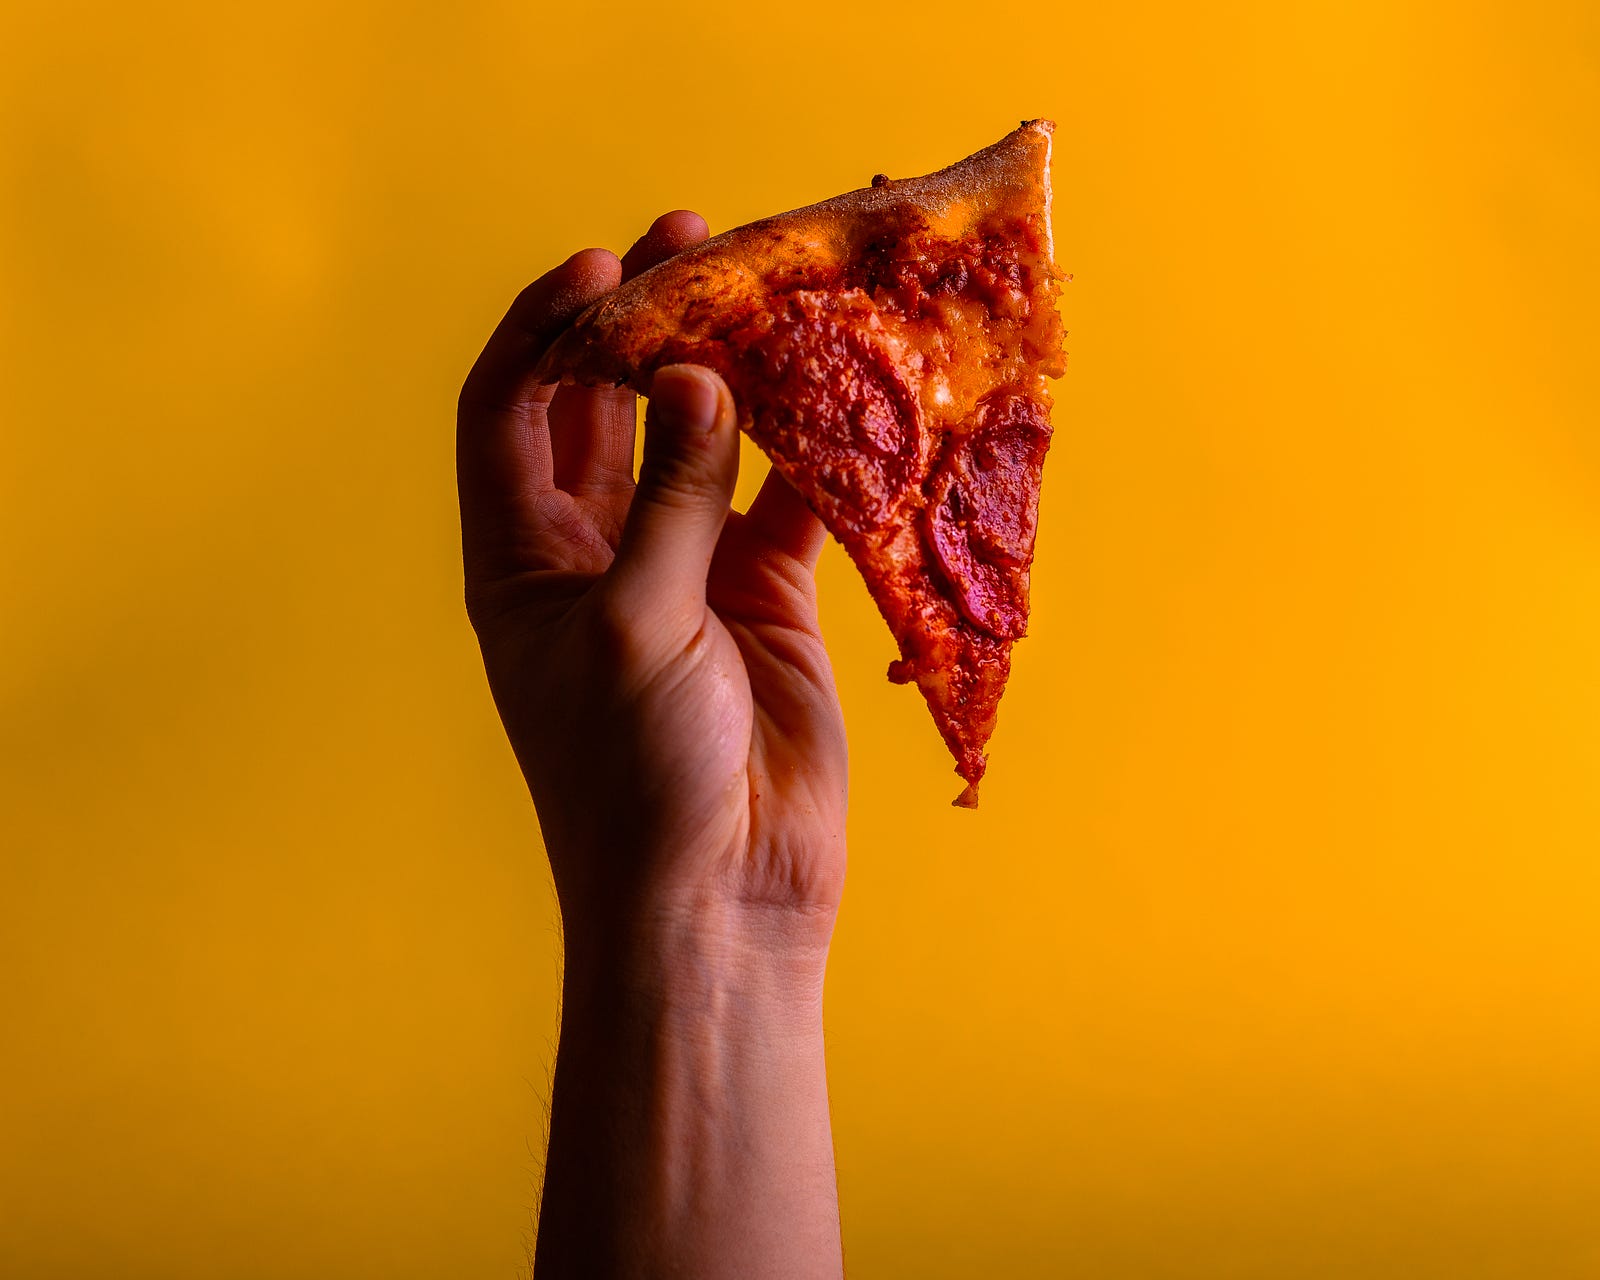 A hand extends from the lower image to hold a single piece of pizza. The slice dangles downward. The background is a mustard color. To reduce weight, exercise alone is not adequate to drop weight; dropping calories is a must.